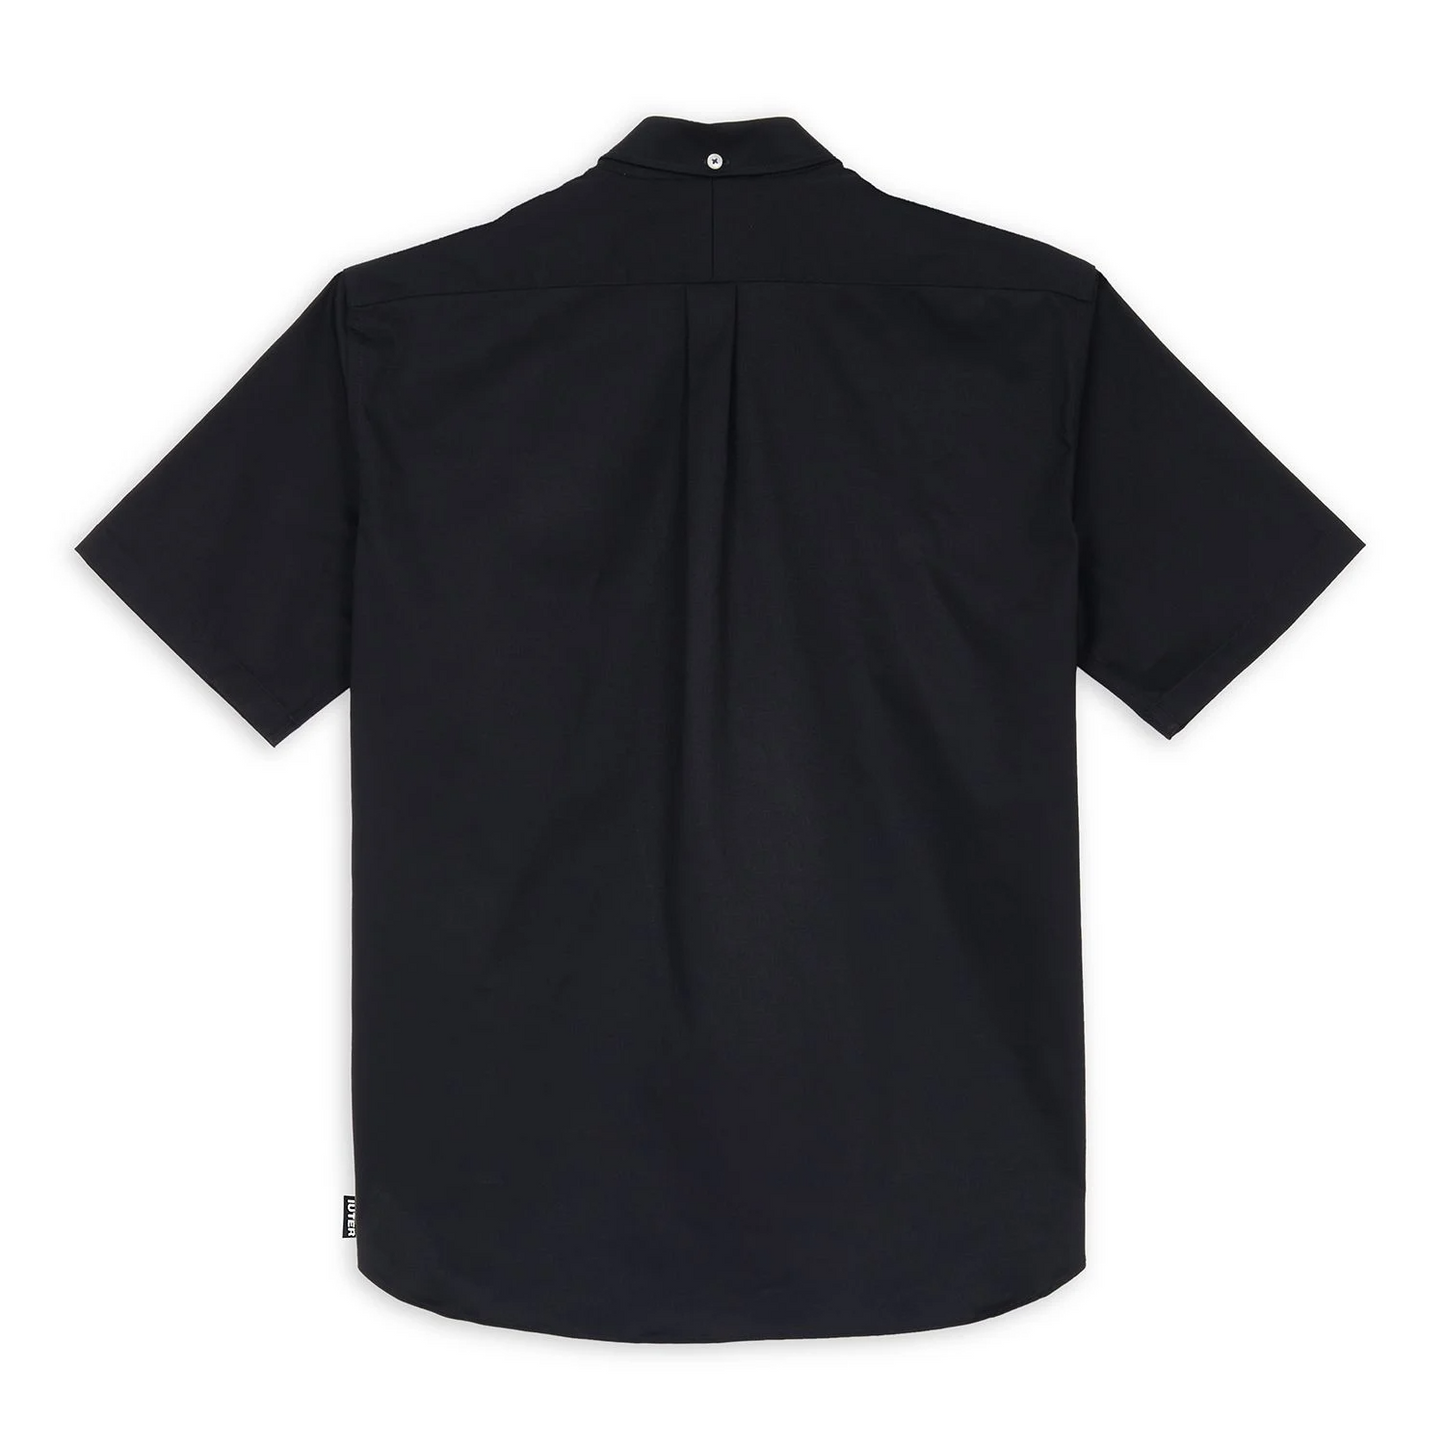 IUTER GRID S/S SHIRT - deviceone